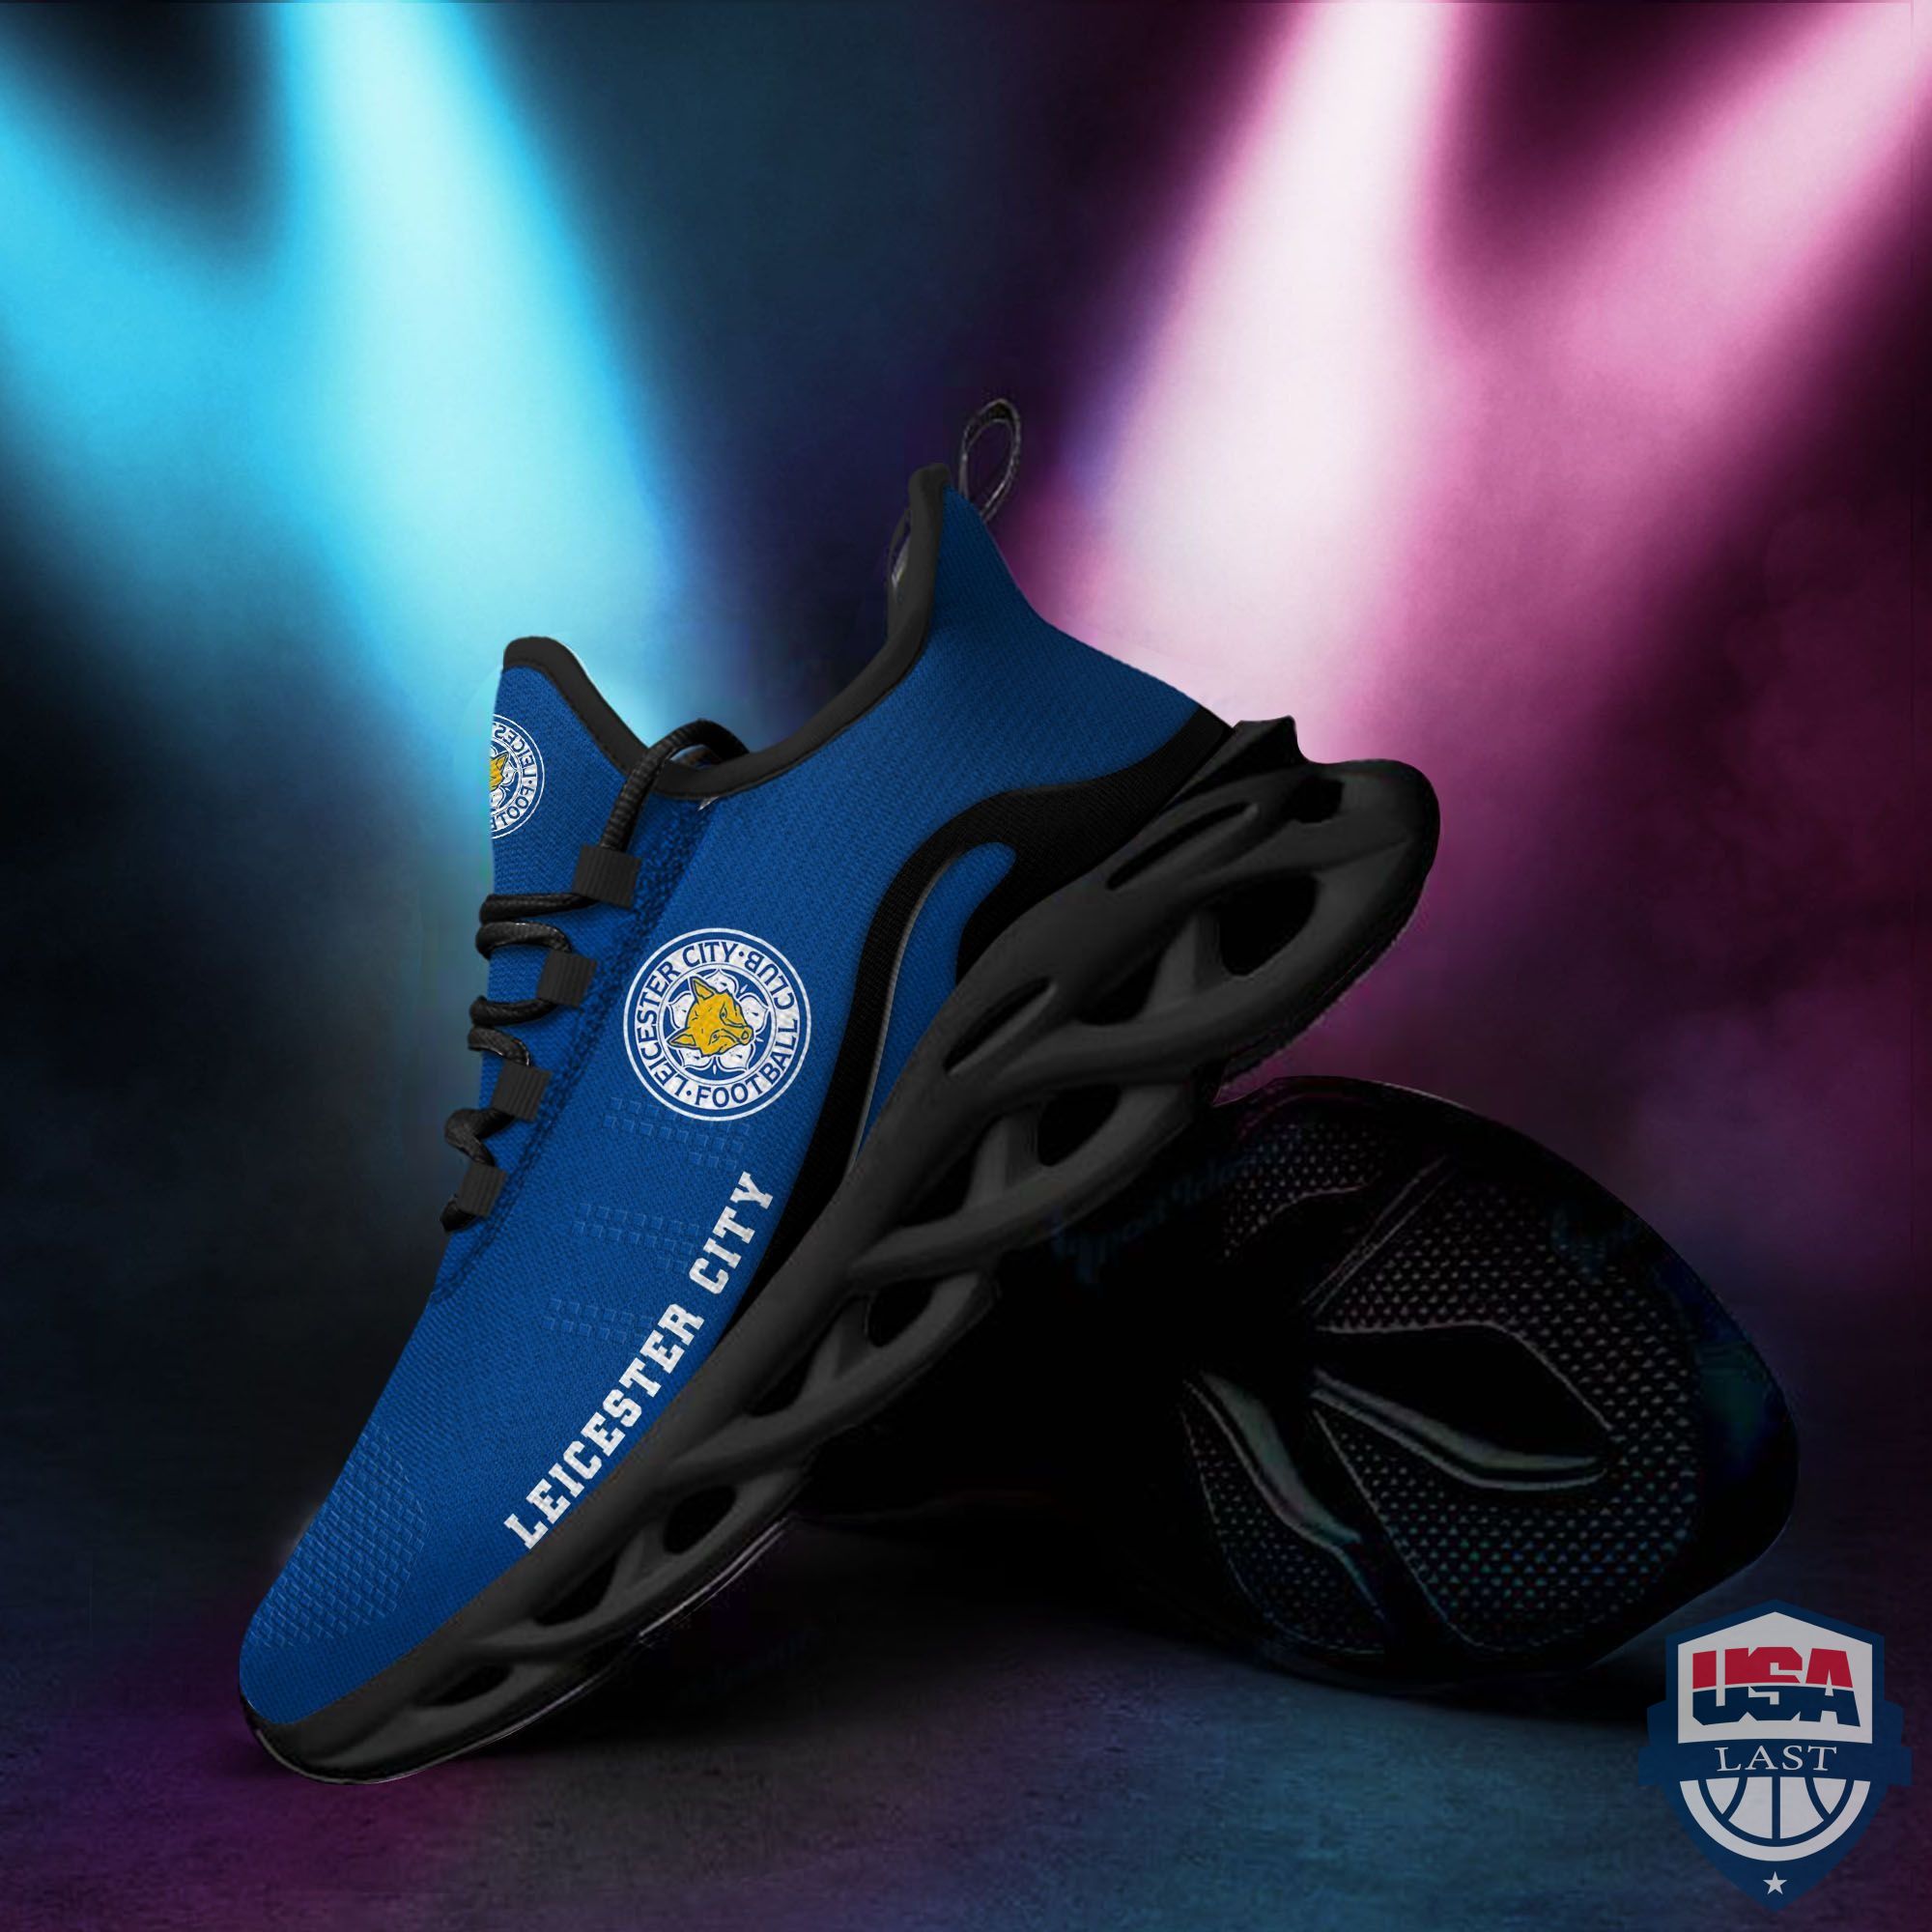 EPL Leicester City Max Soul Clunky Sneaker Shoes